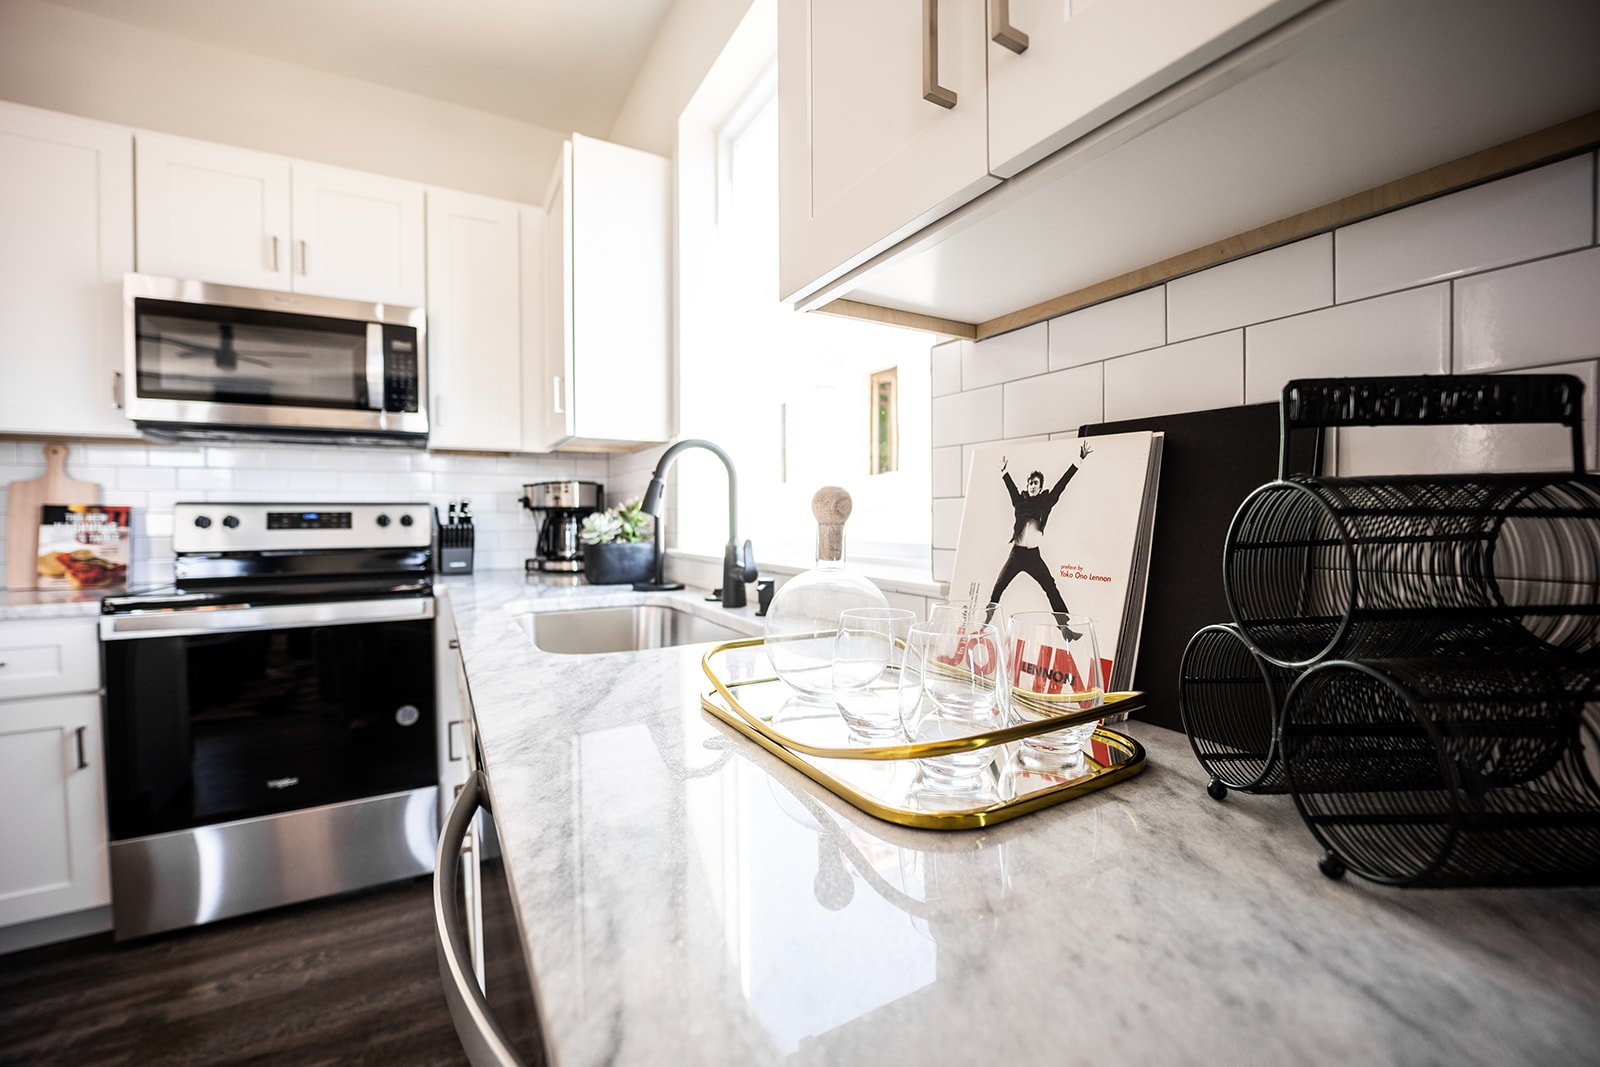 Unit 2 - Fully equipped kitchen stocked with your basic cooking essentials. Complete with stainless steel appliances and breakfast bar seating. (2nd floor)